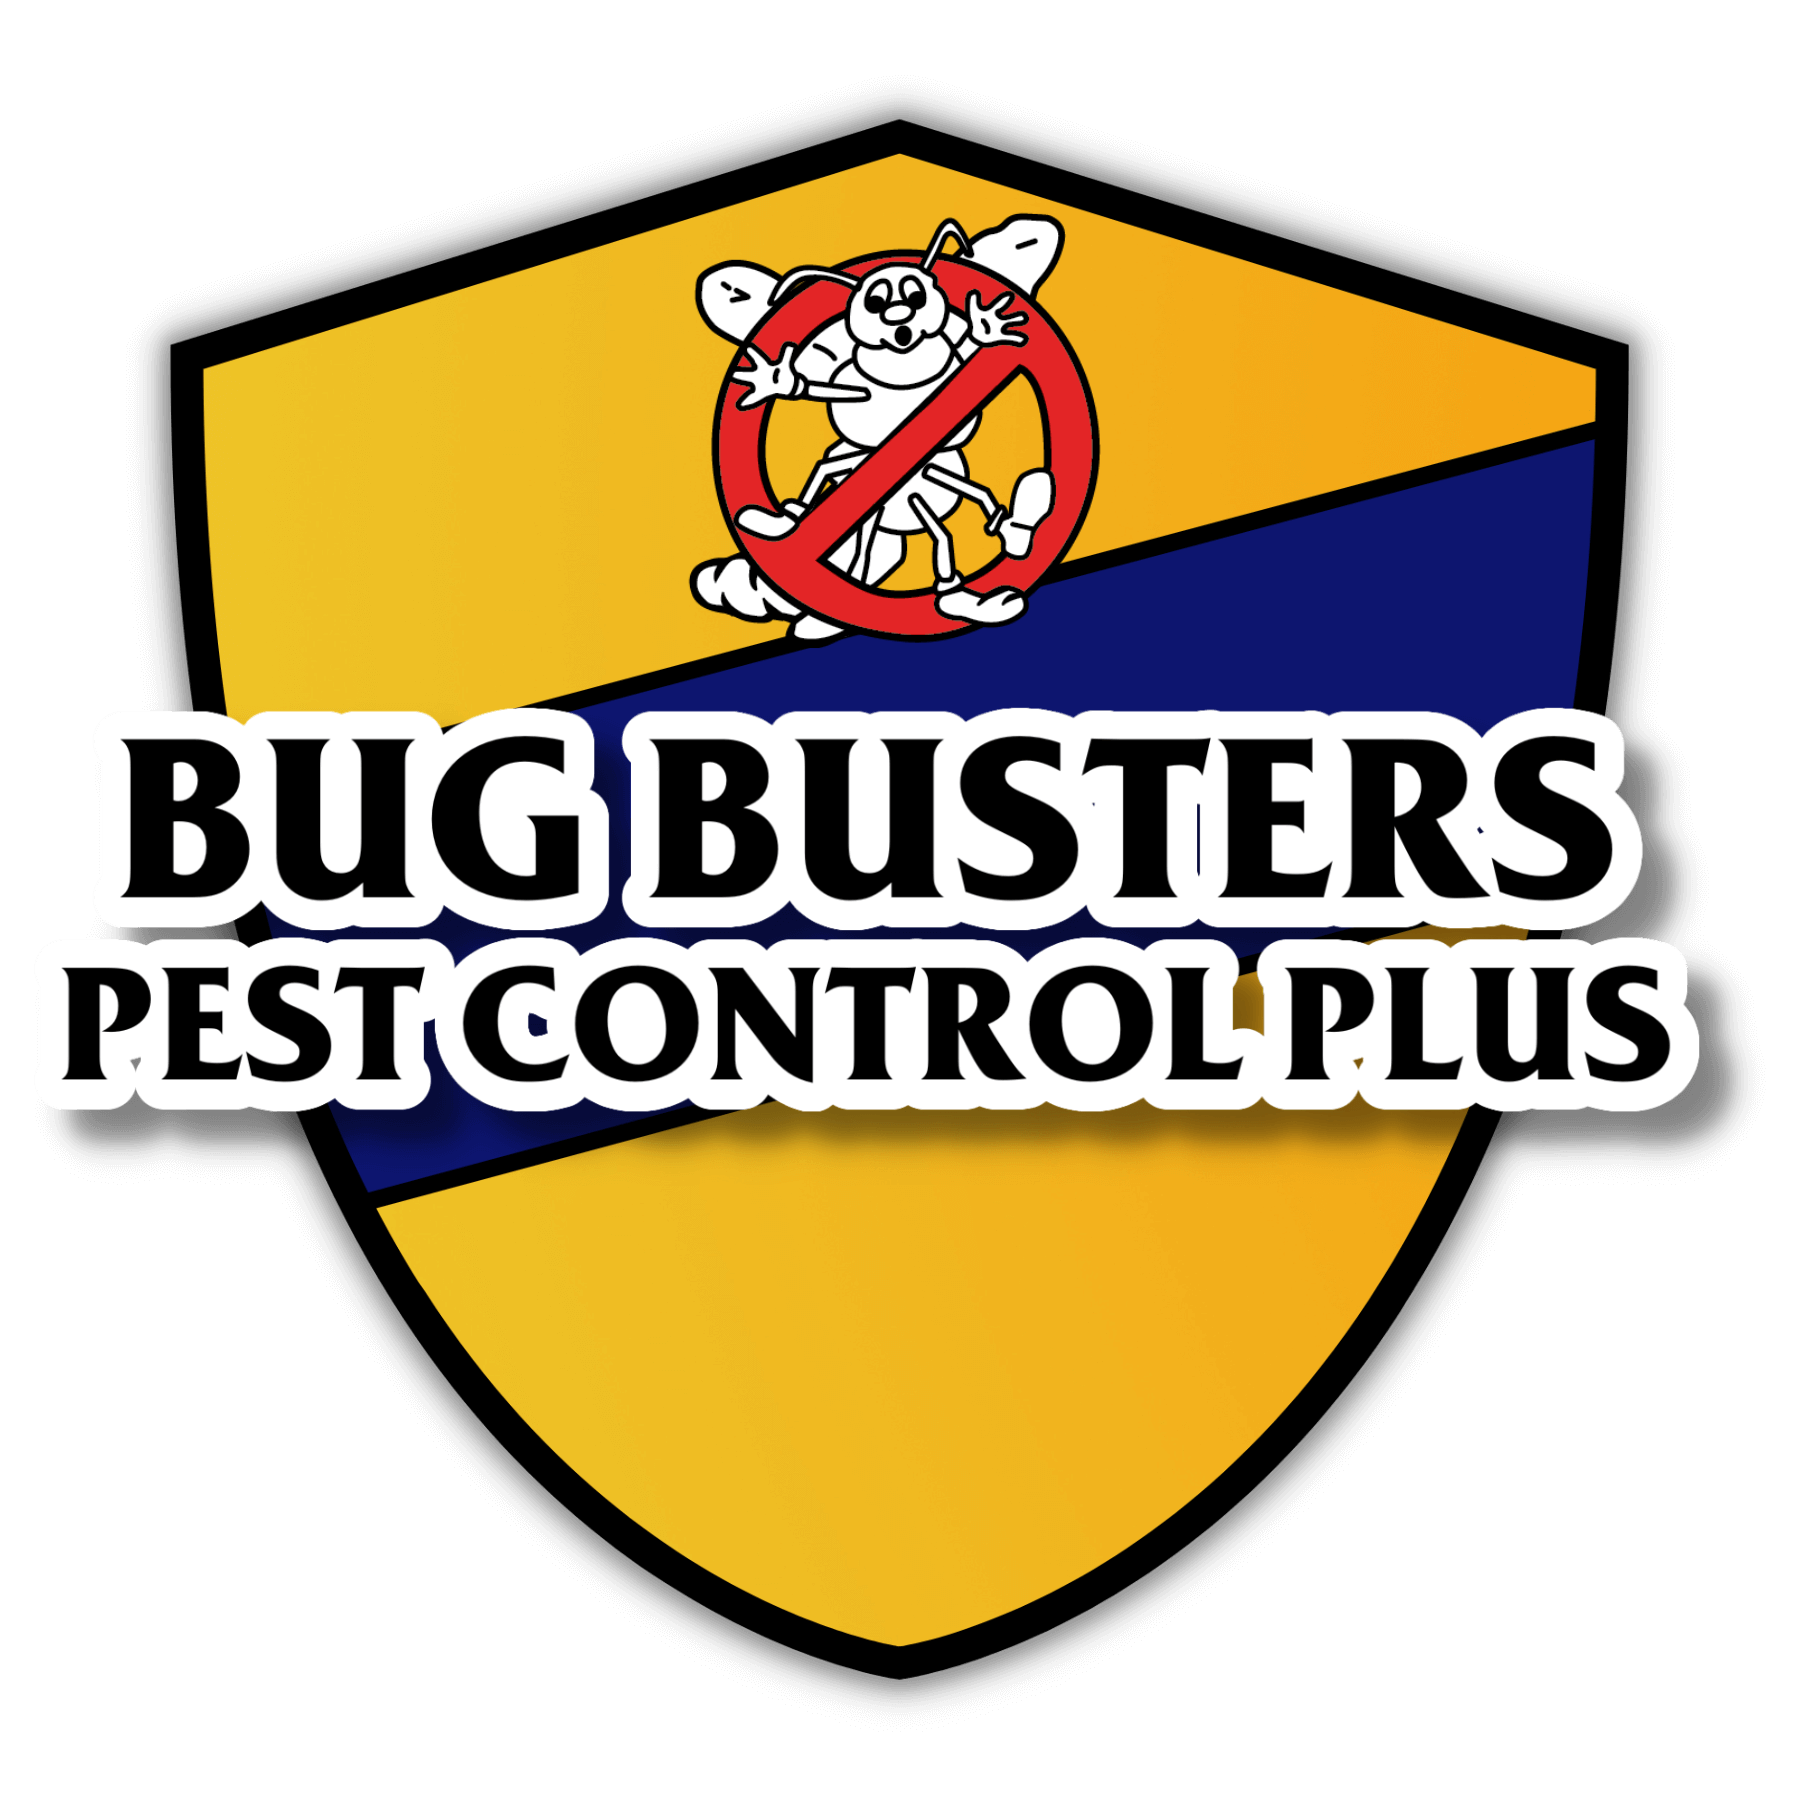 Bug Busters Pest Control Plus Badge